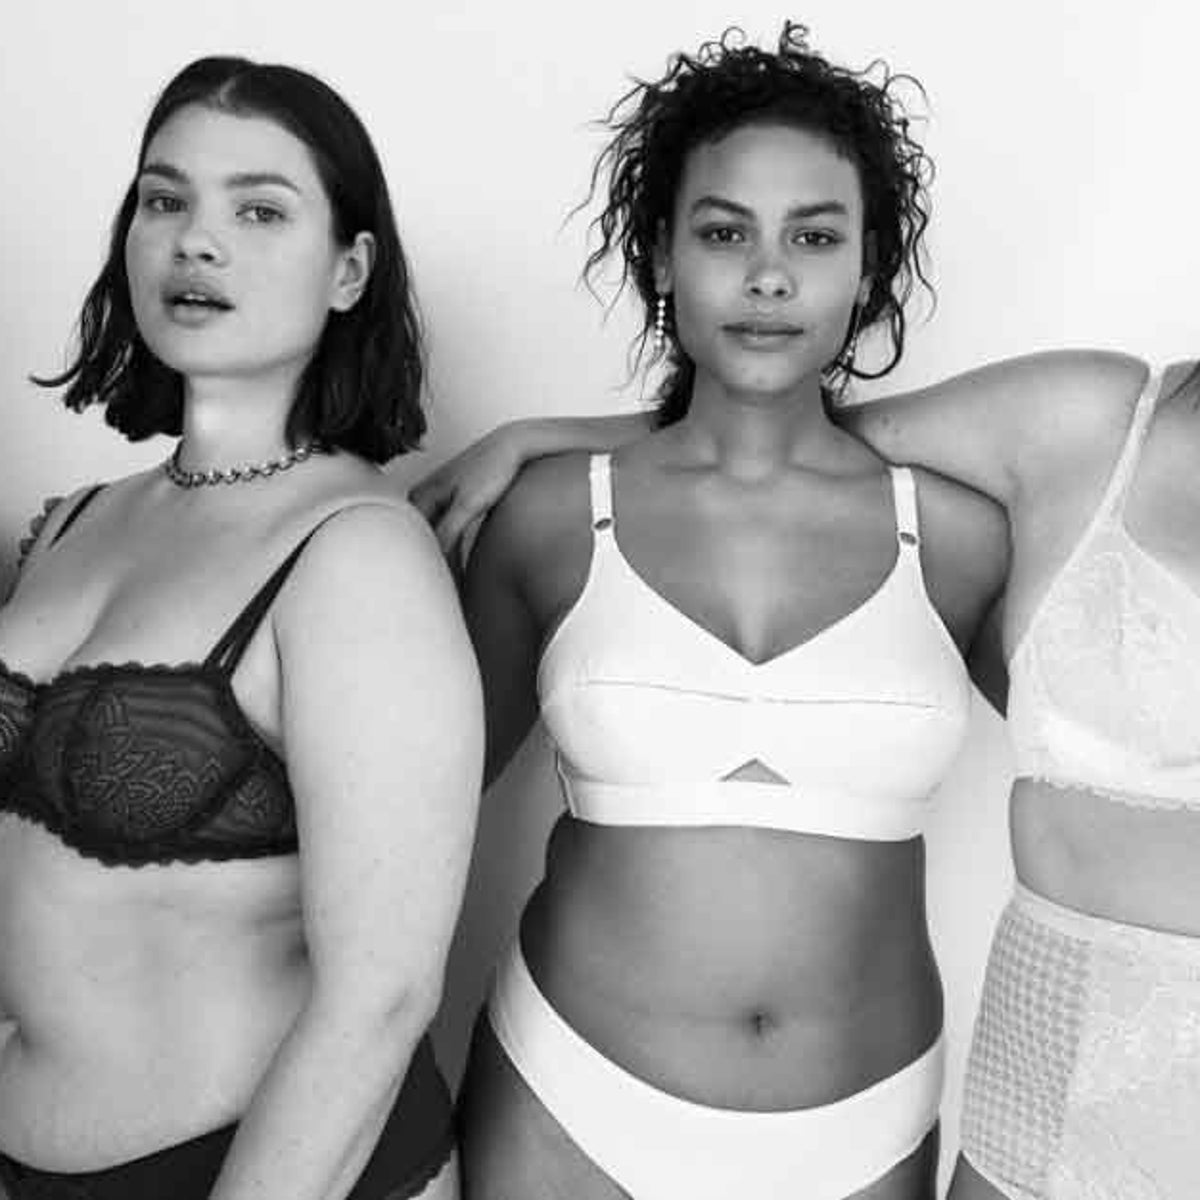 Vogue responds to 'plus size' backlash with lingerie 'for all